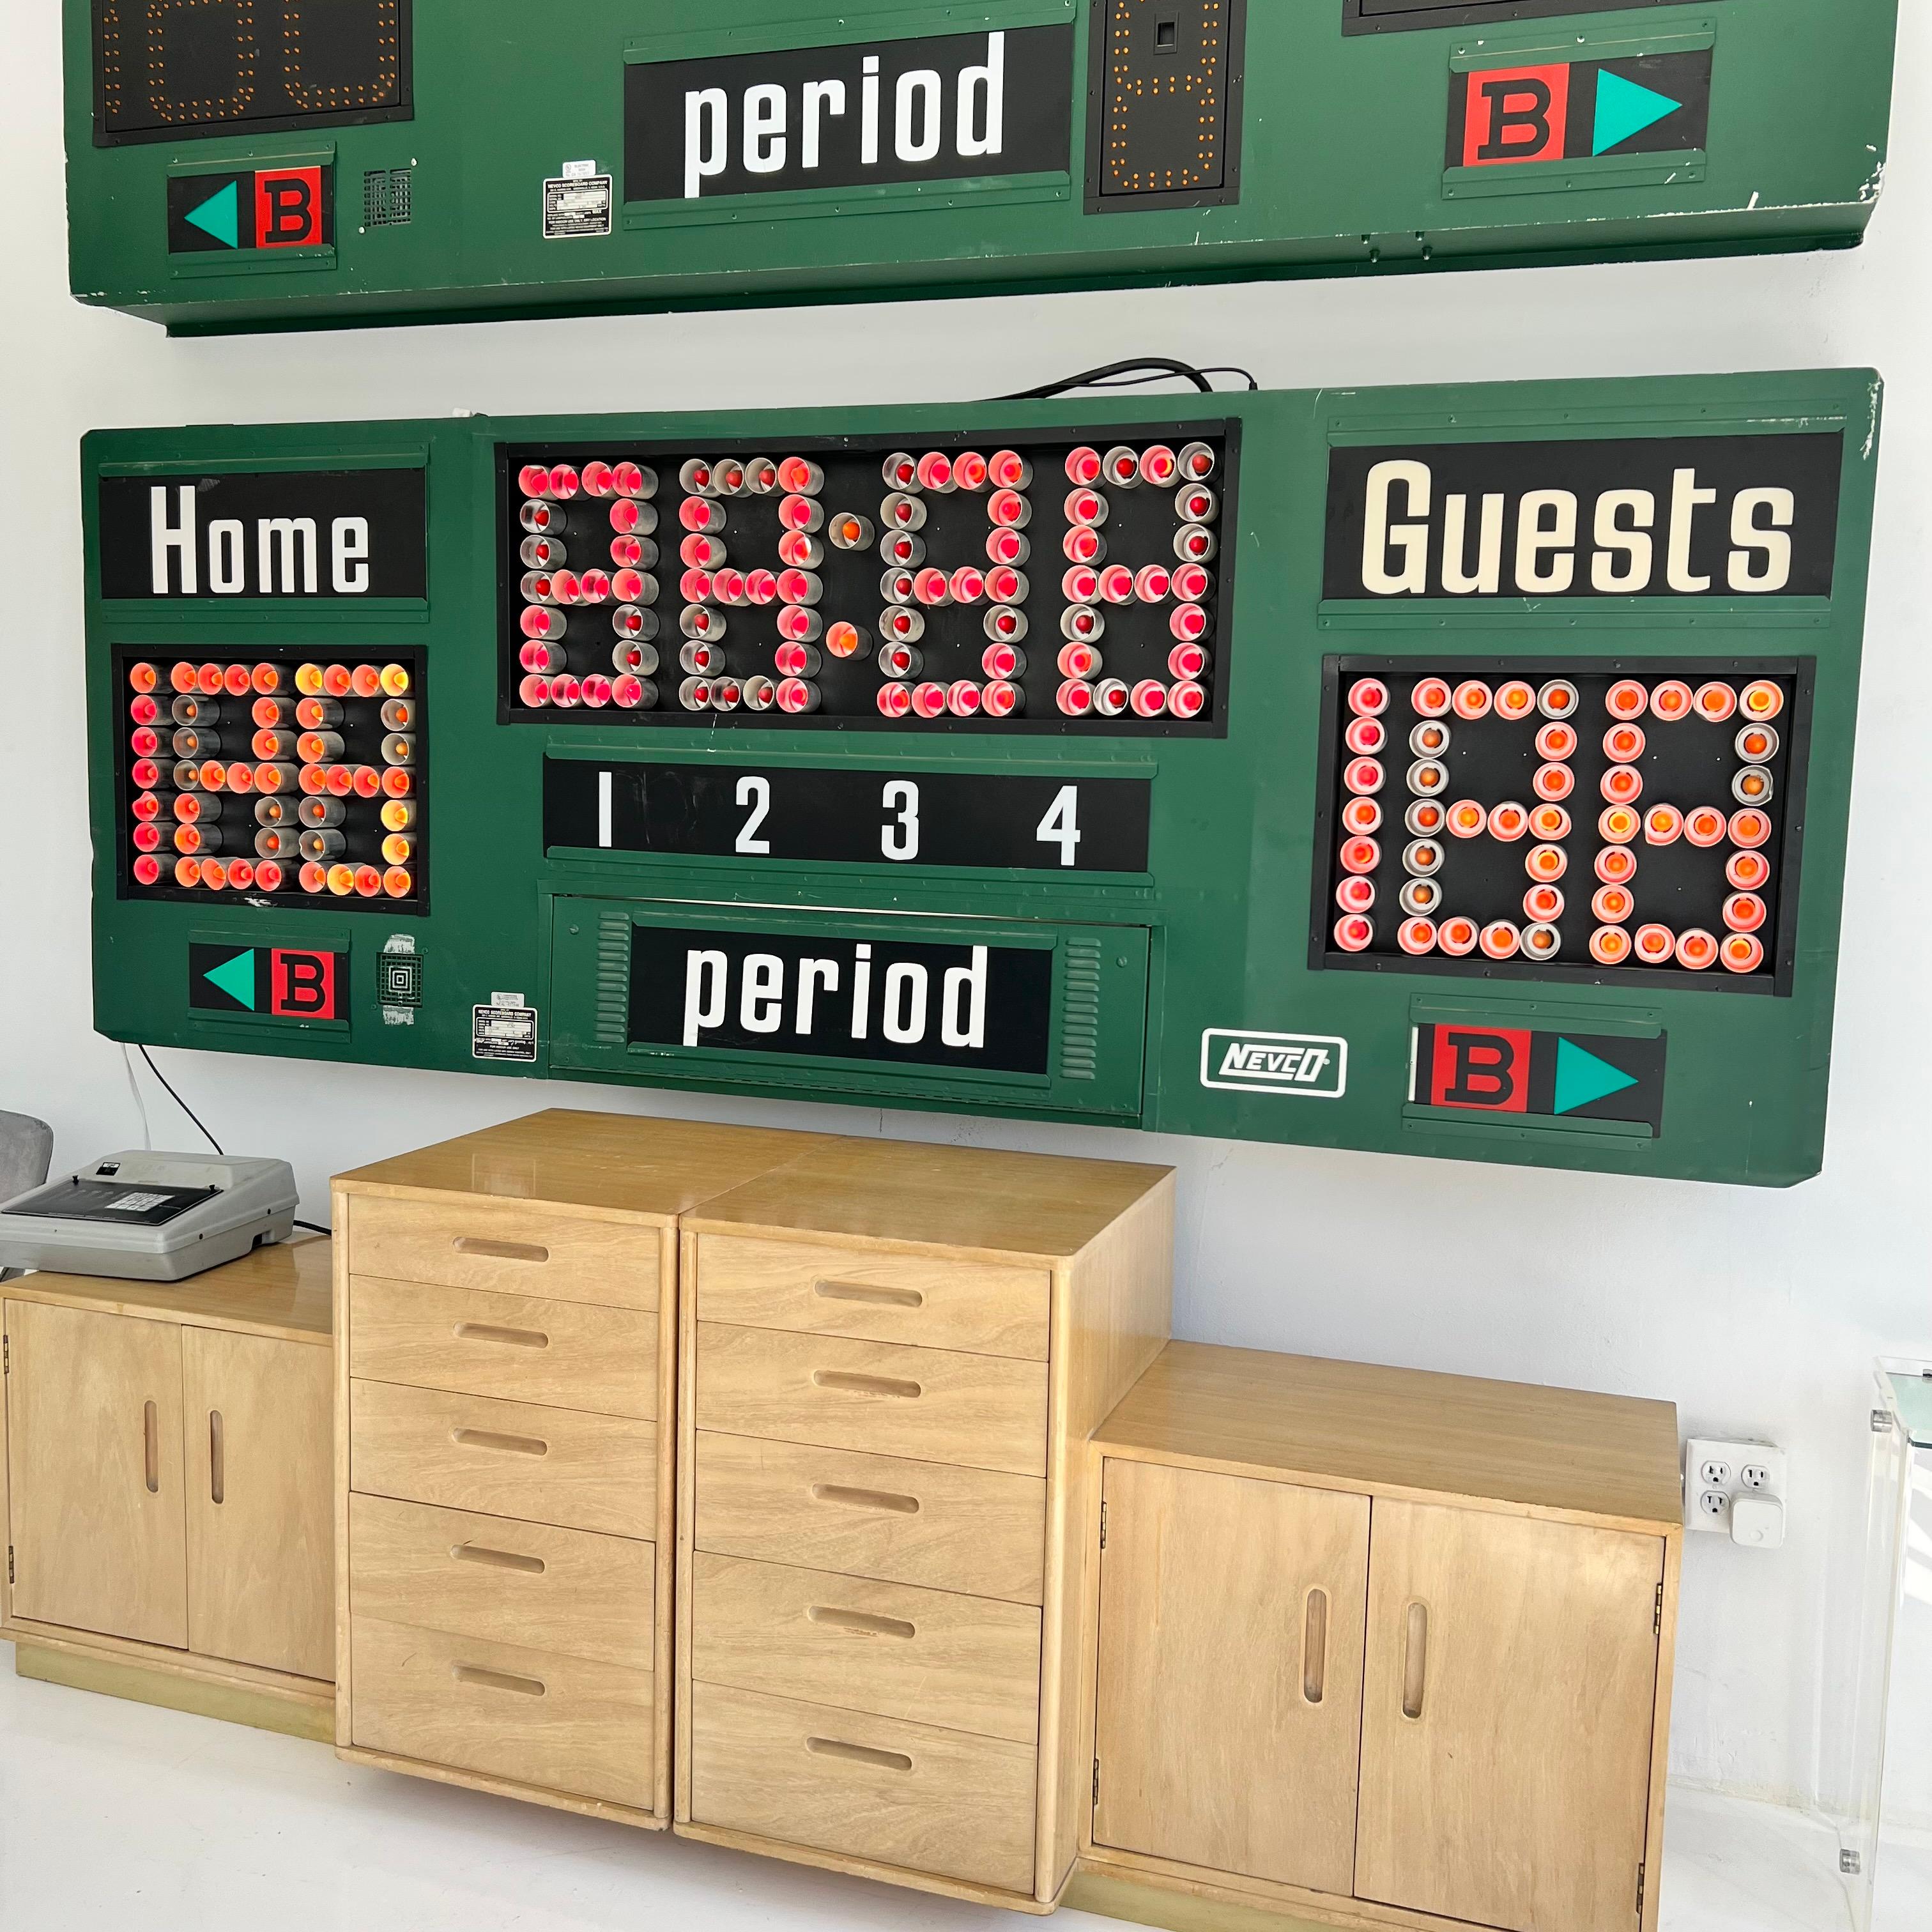 Fantastic green metal scoreboard by Nevco. Made in the 1990s in the US. Can be used for multiple sports. 100% functional and gone through. Running clock, guest and home score and bonus. The clock section uses red Christmas light bulbs. All other